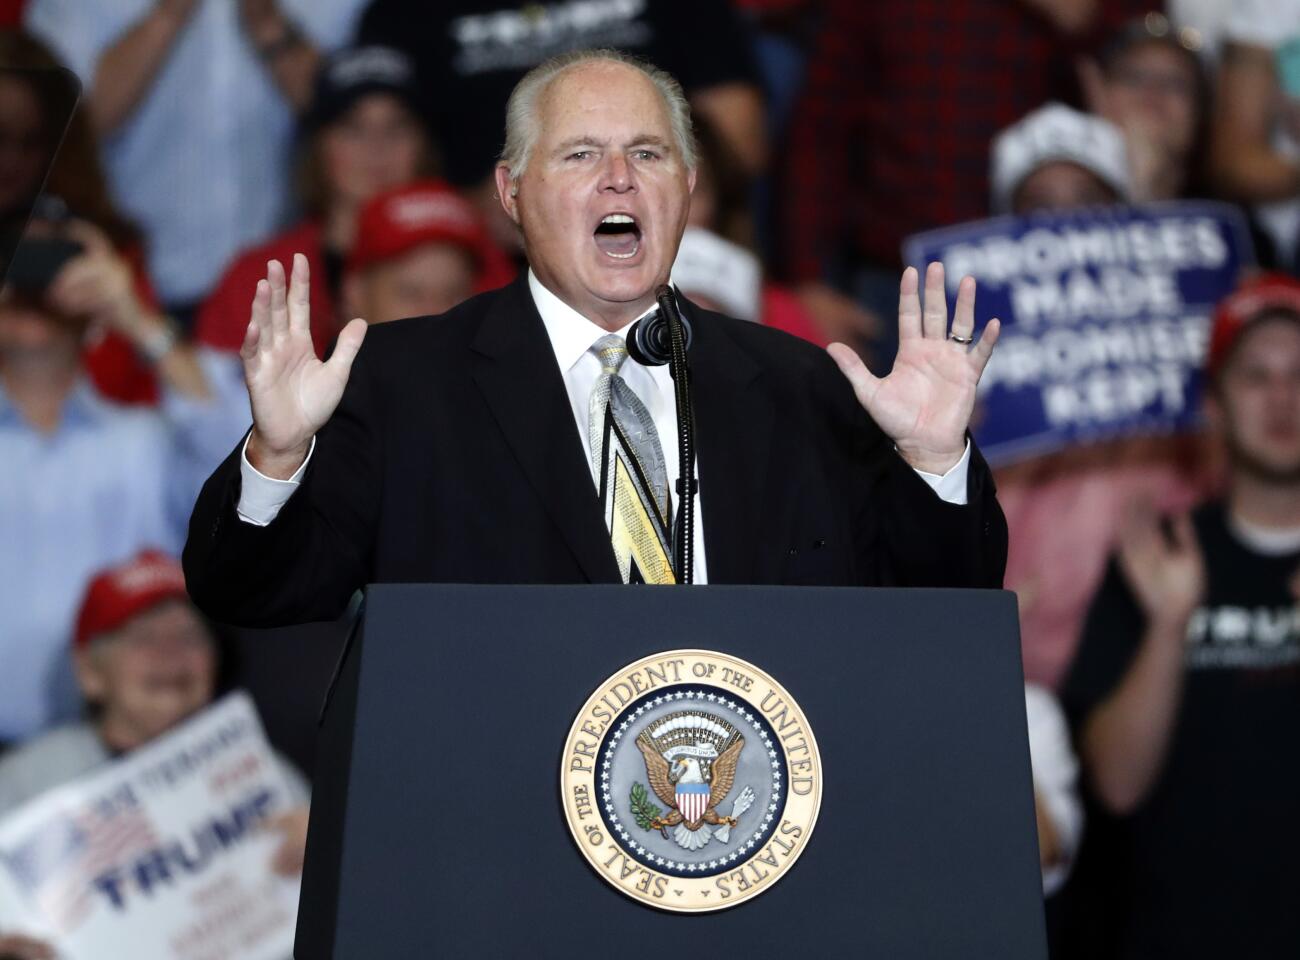 Rush Limbaugh gestures with both hands as he speaks from behind a podium.